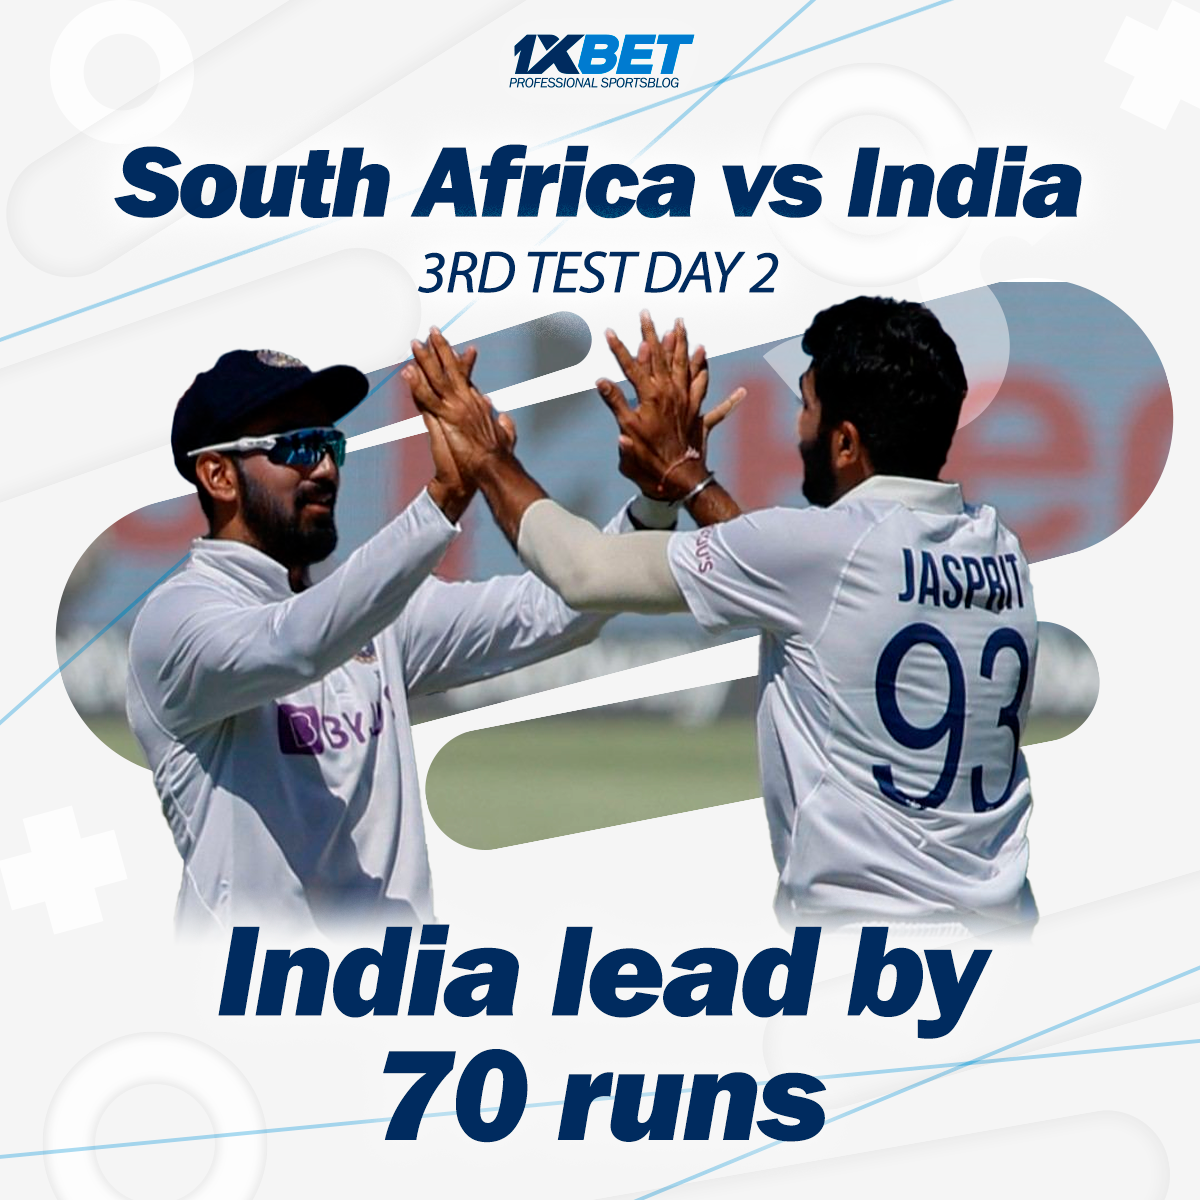 India leads South Africa by 70 runs